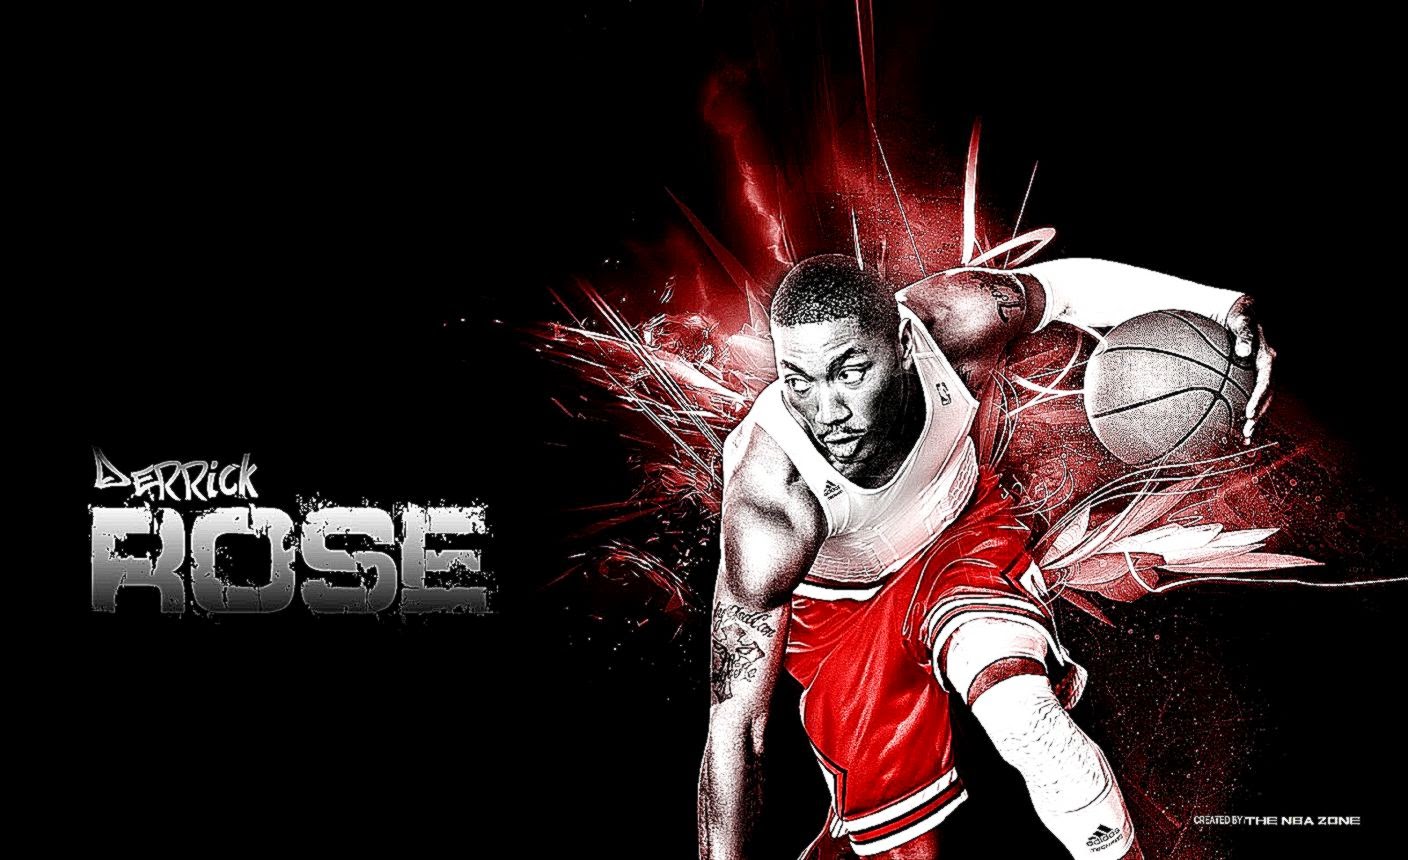 cool nba wallpapers,graphic design,illustration,graphics,basketball player,pc game